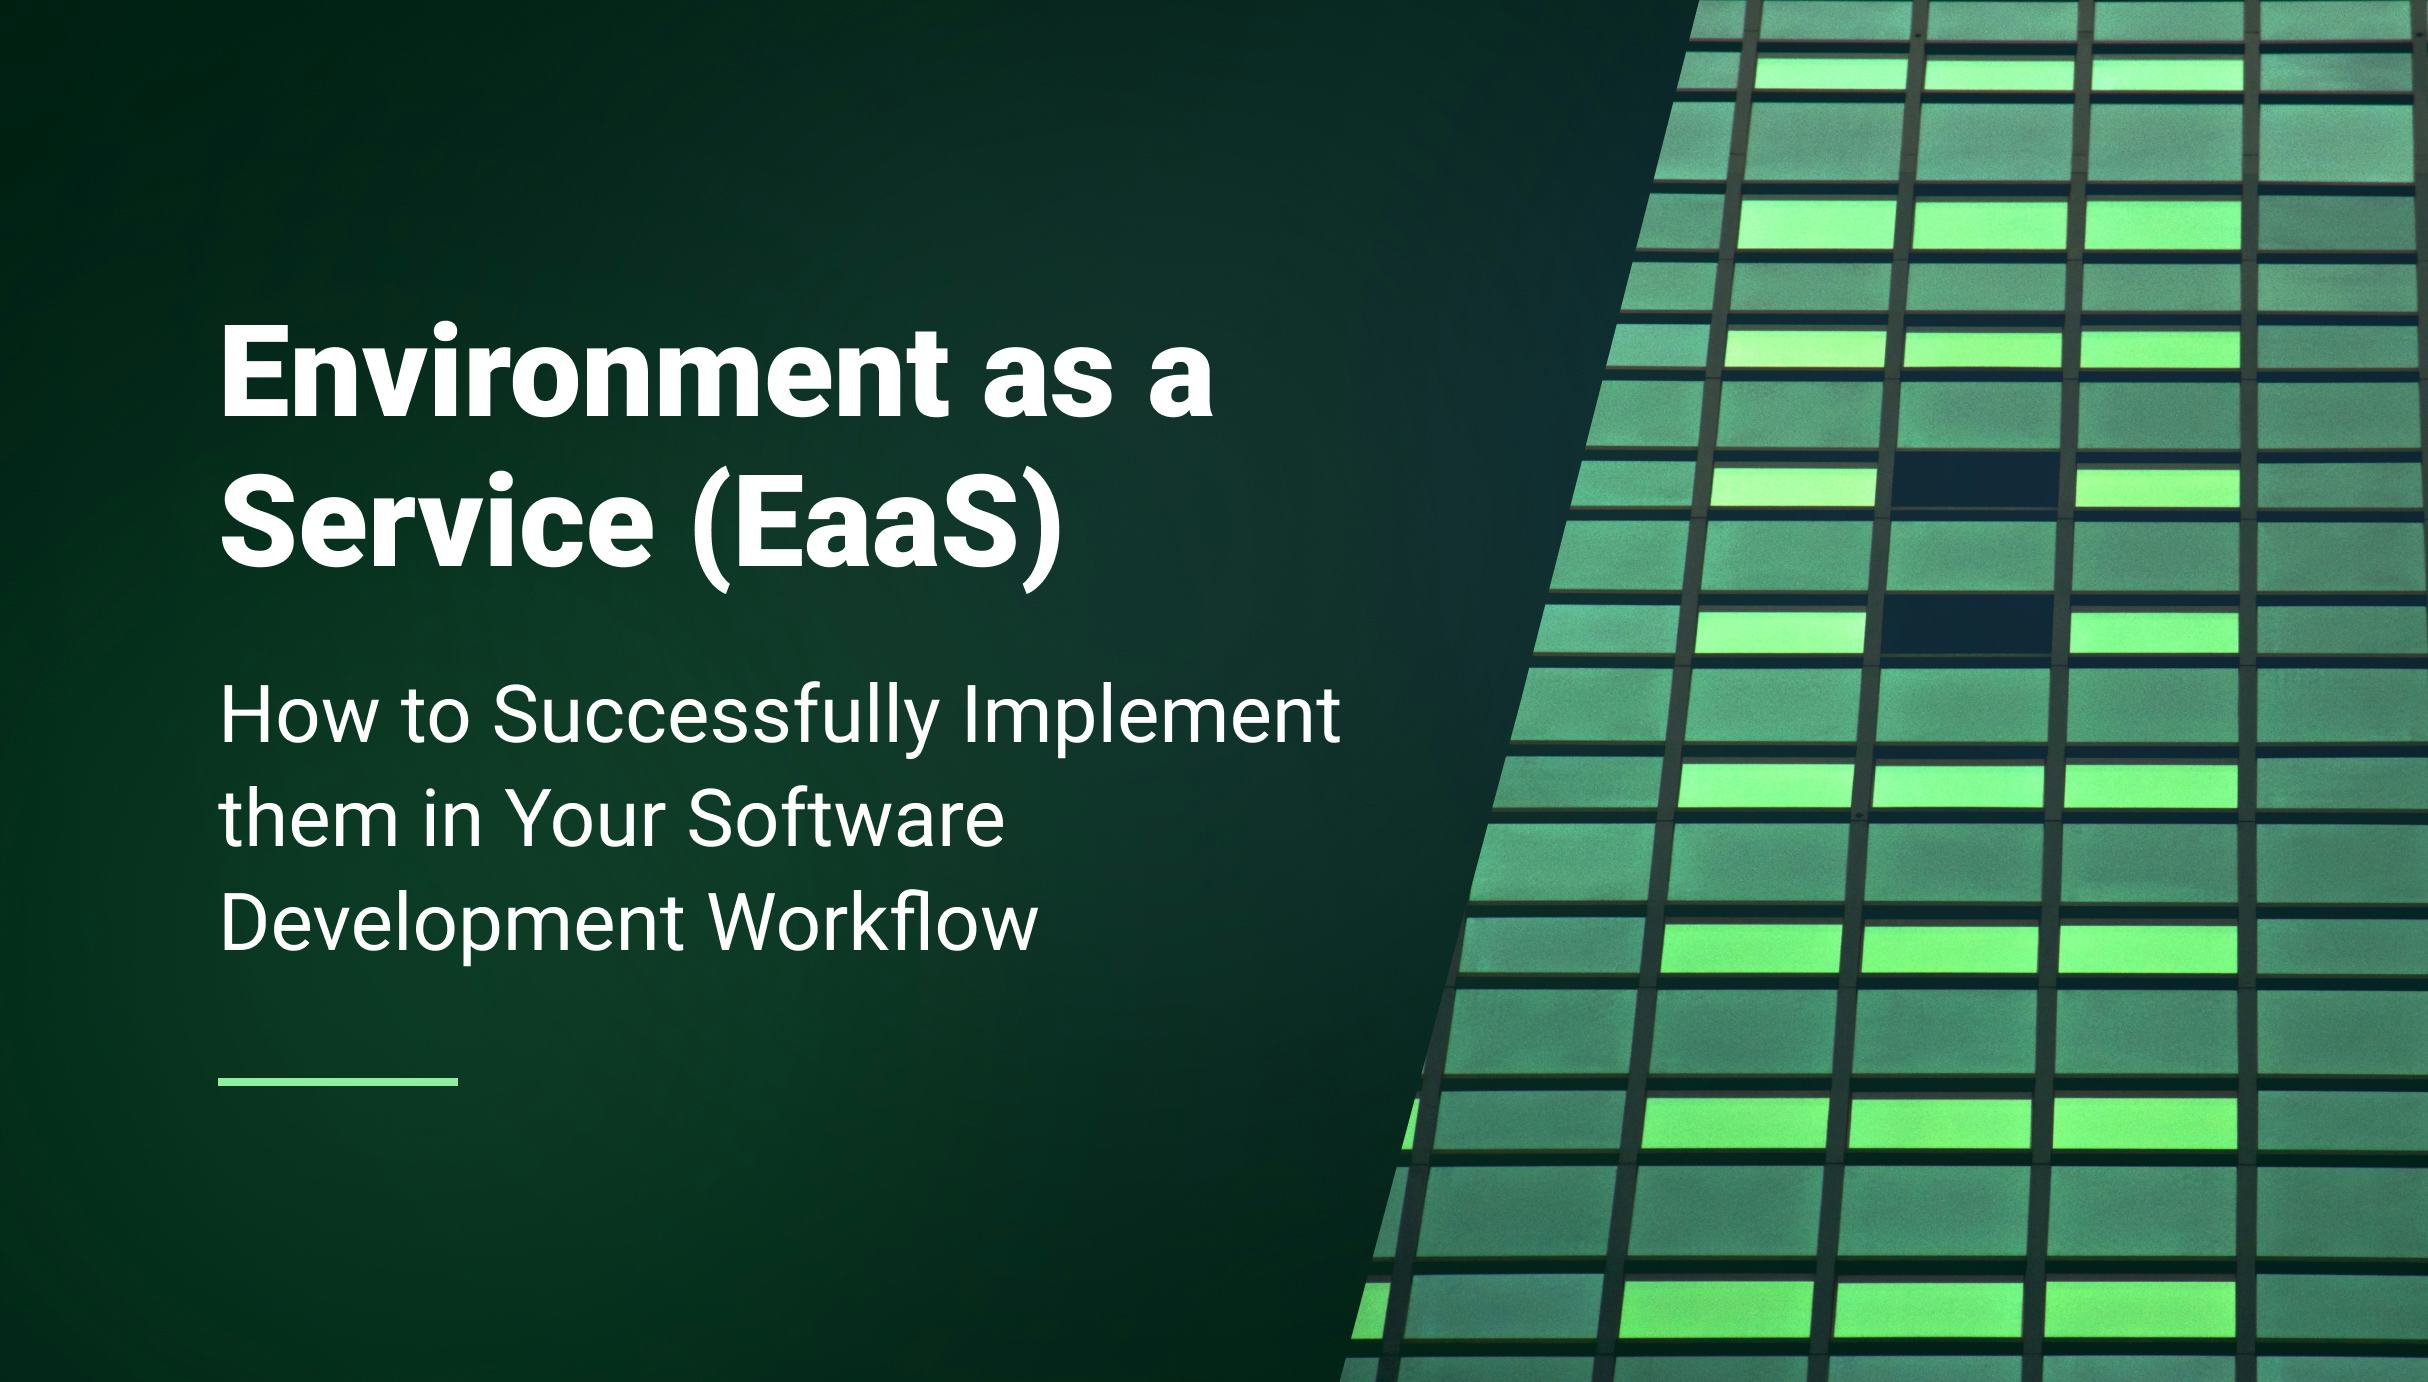 How to Successfully Implement an Environment as a Service (EaaS) Solution in Your Software Development Workflow - Qovery